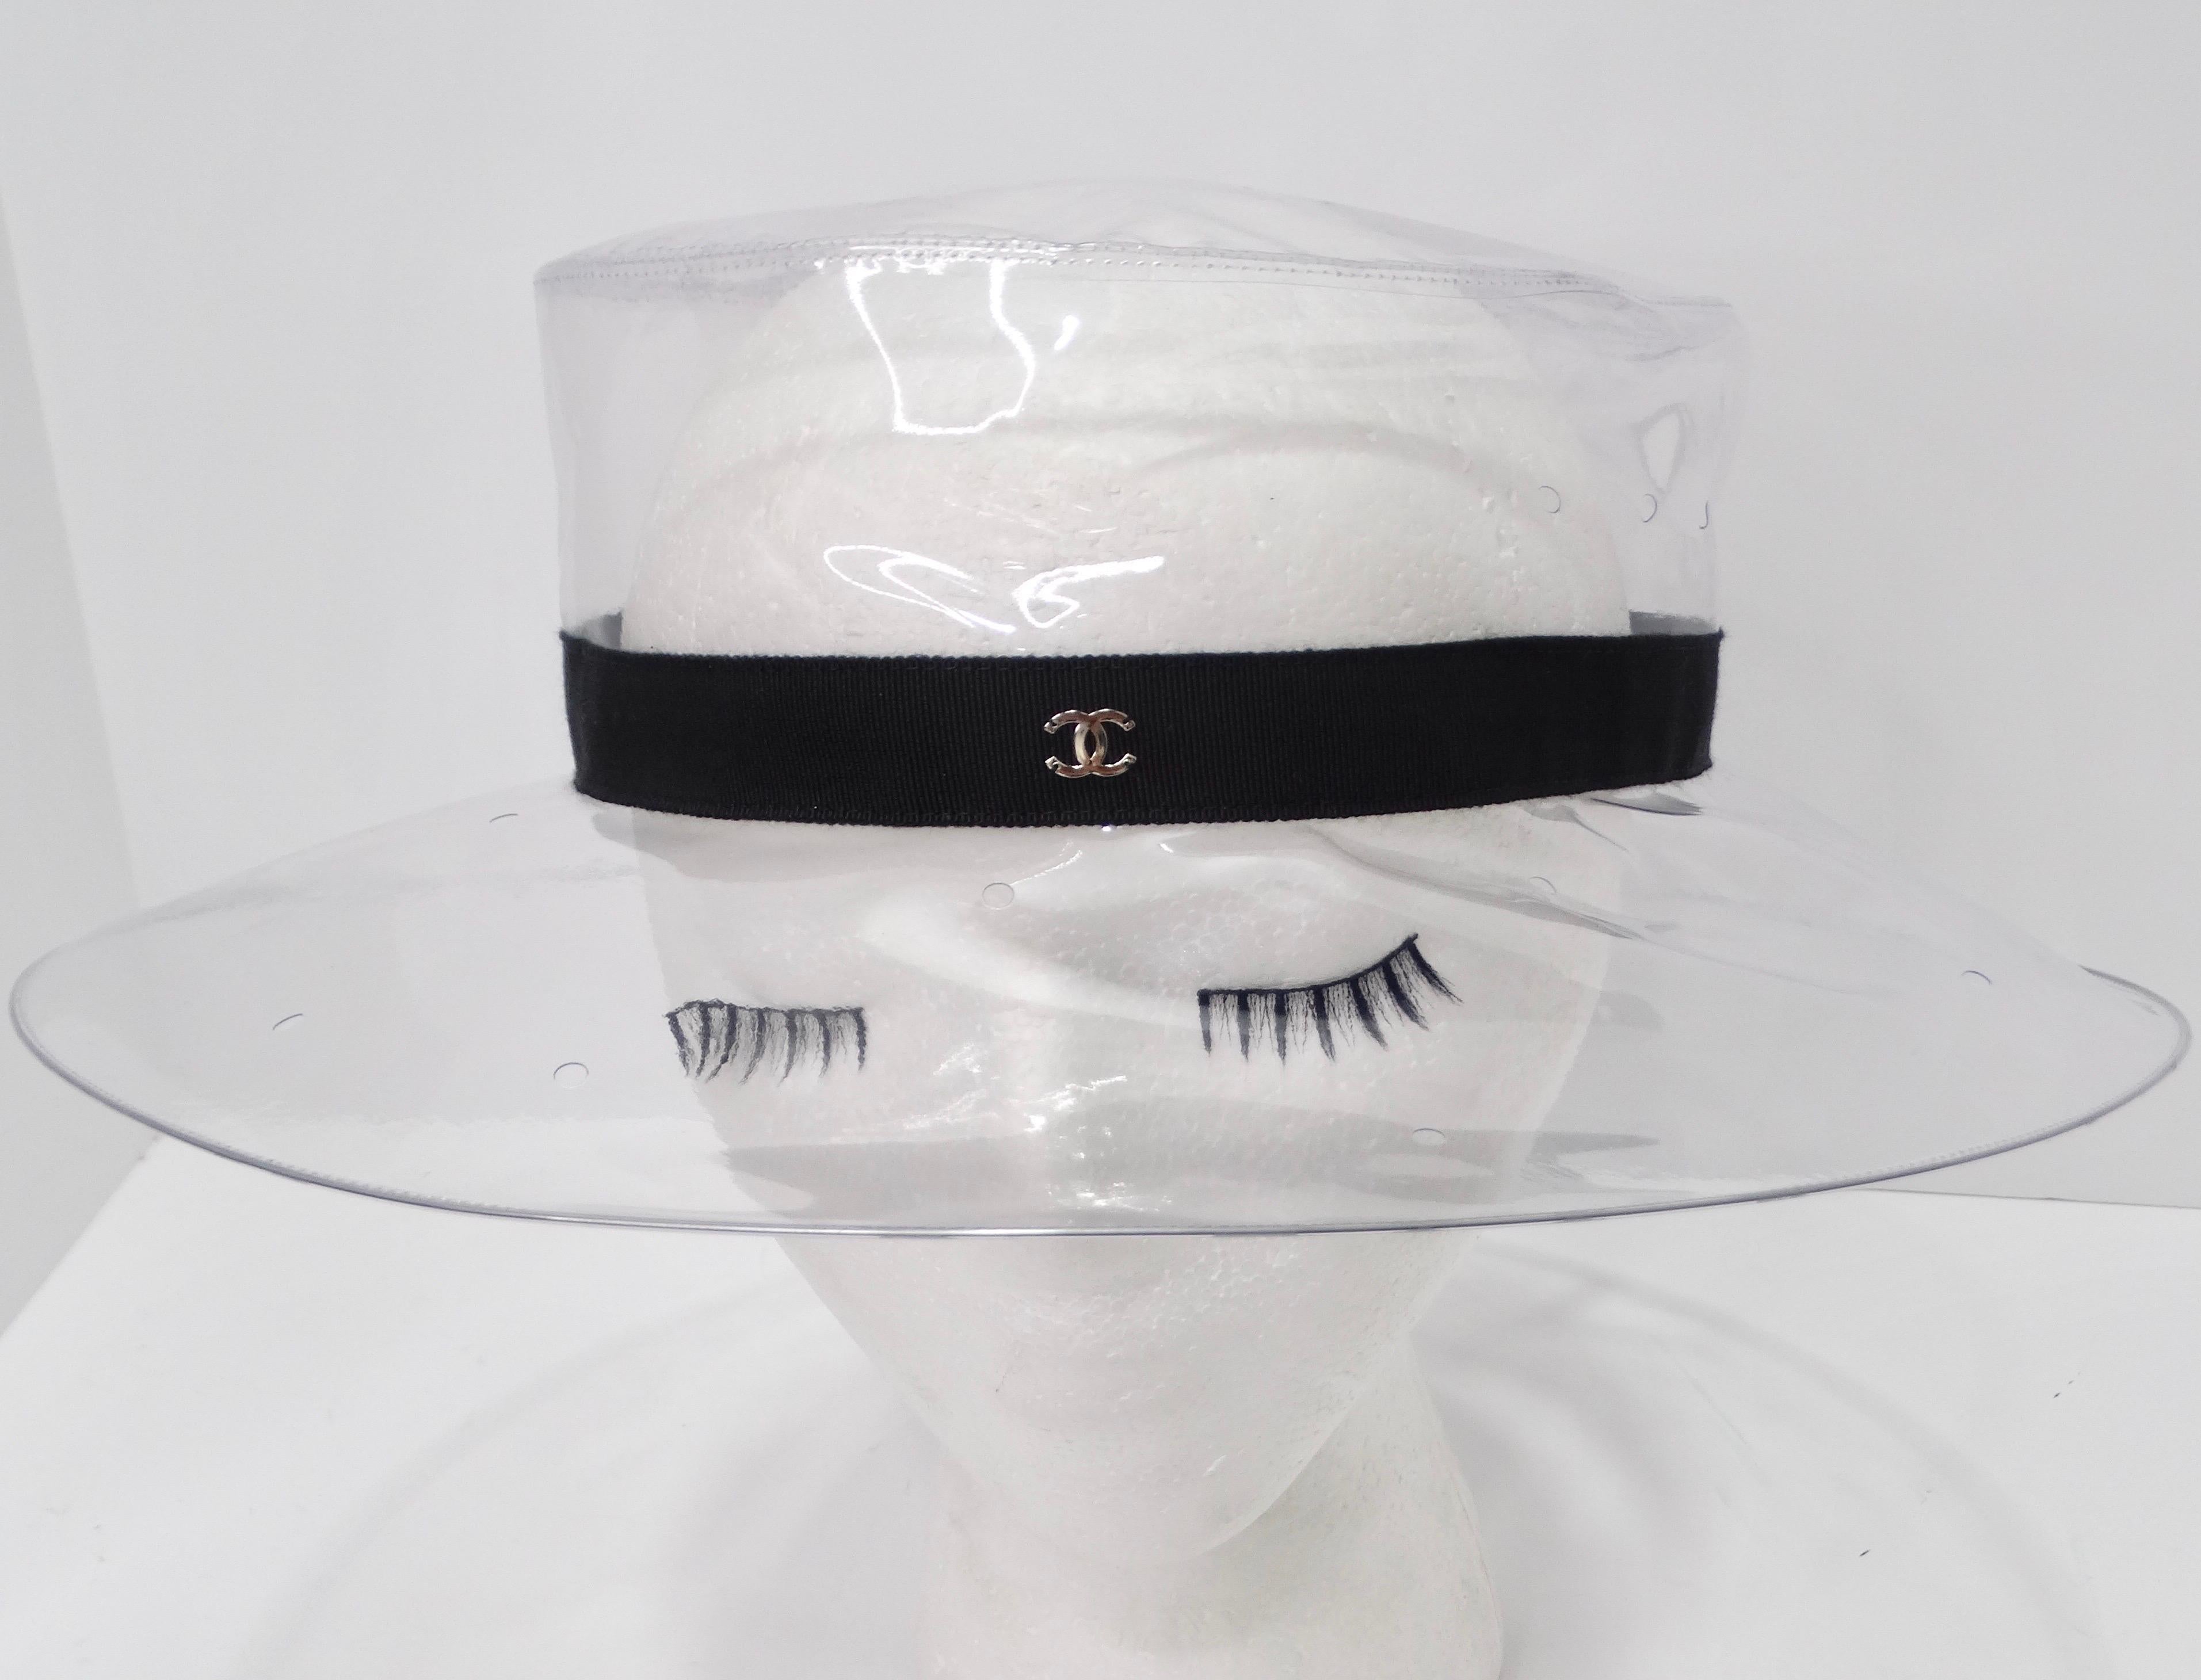 Step into the realm of high fashion with this Chanel 2018 clear PVC sun hat, a must-have accessory for the style-conscious. This exquisite sun hat boasts a black ribbon elegantly wrapped around its base, adding a touch of sophistication to its